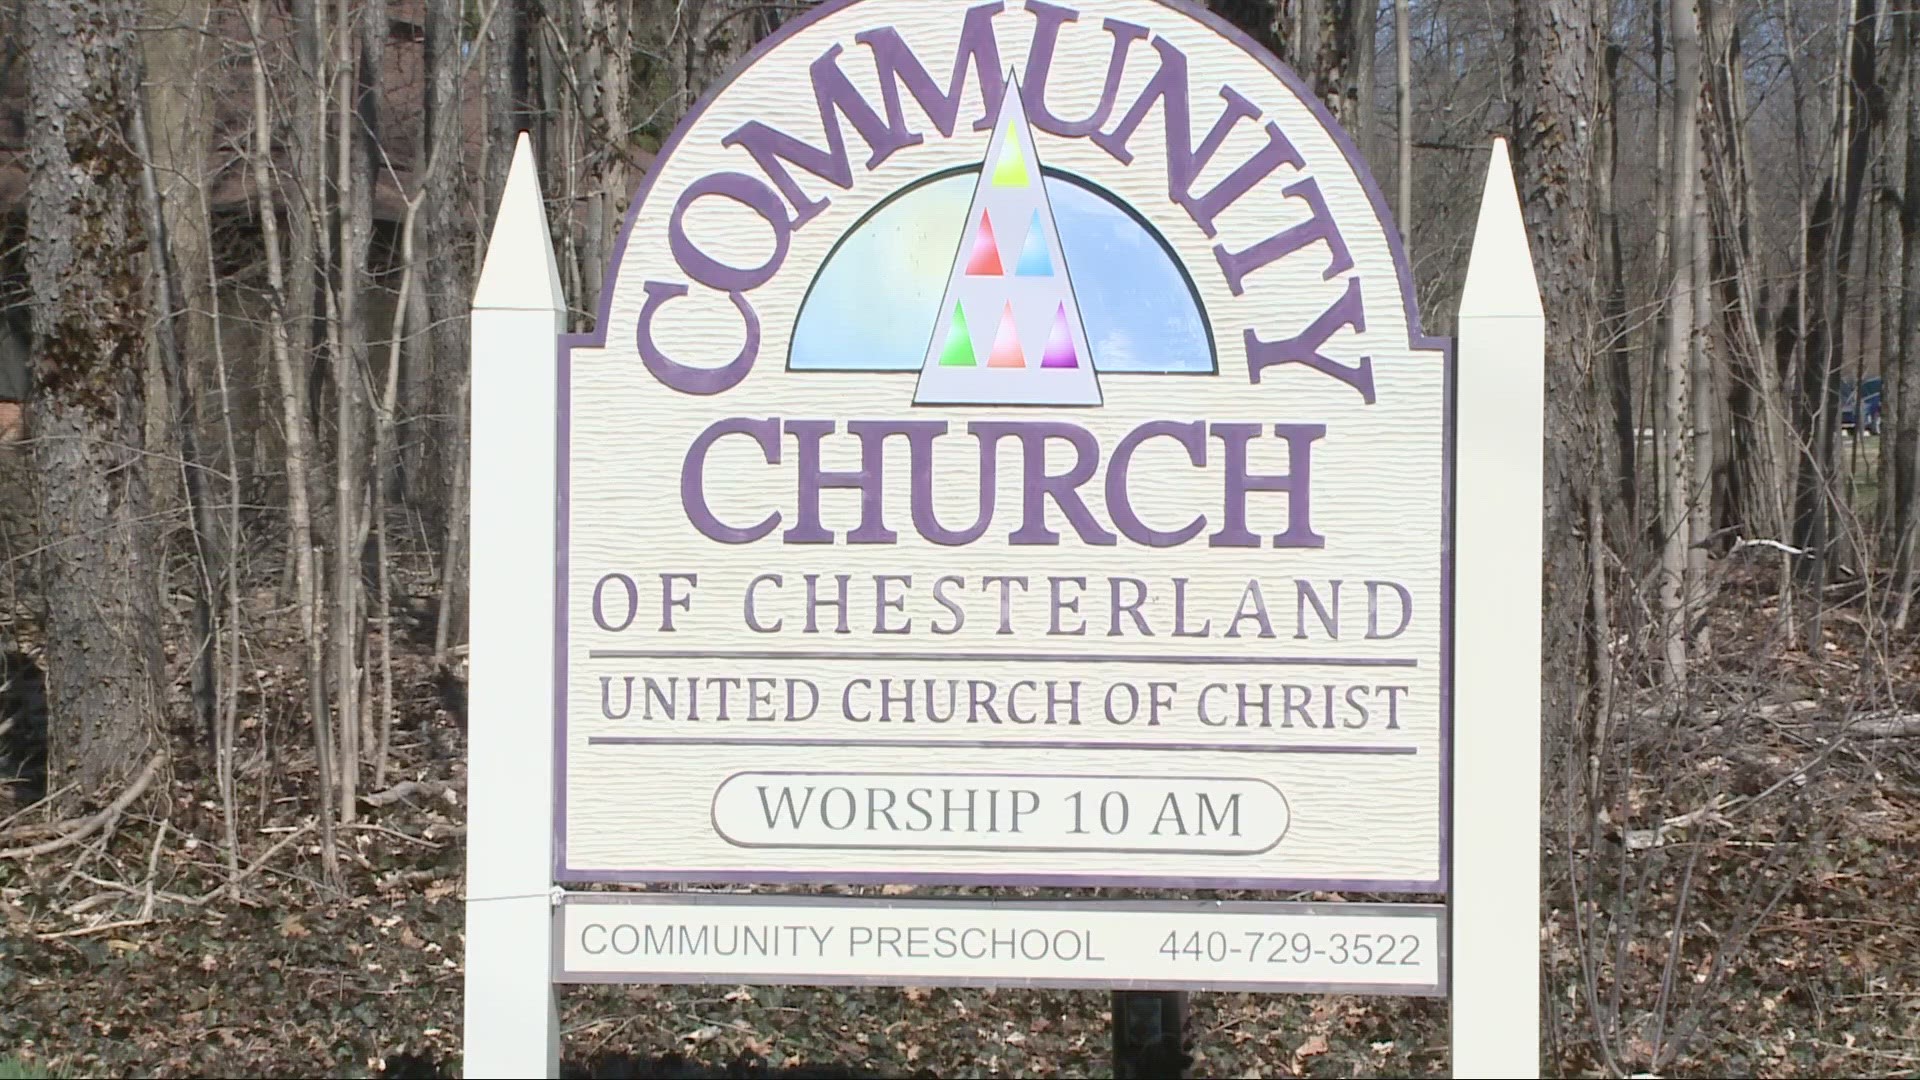 A business and church in Geauga County are receiving threats ahead of a drag brunch and drag queen story hour set for this weekend.